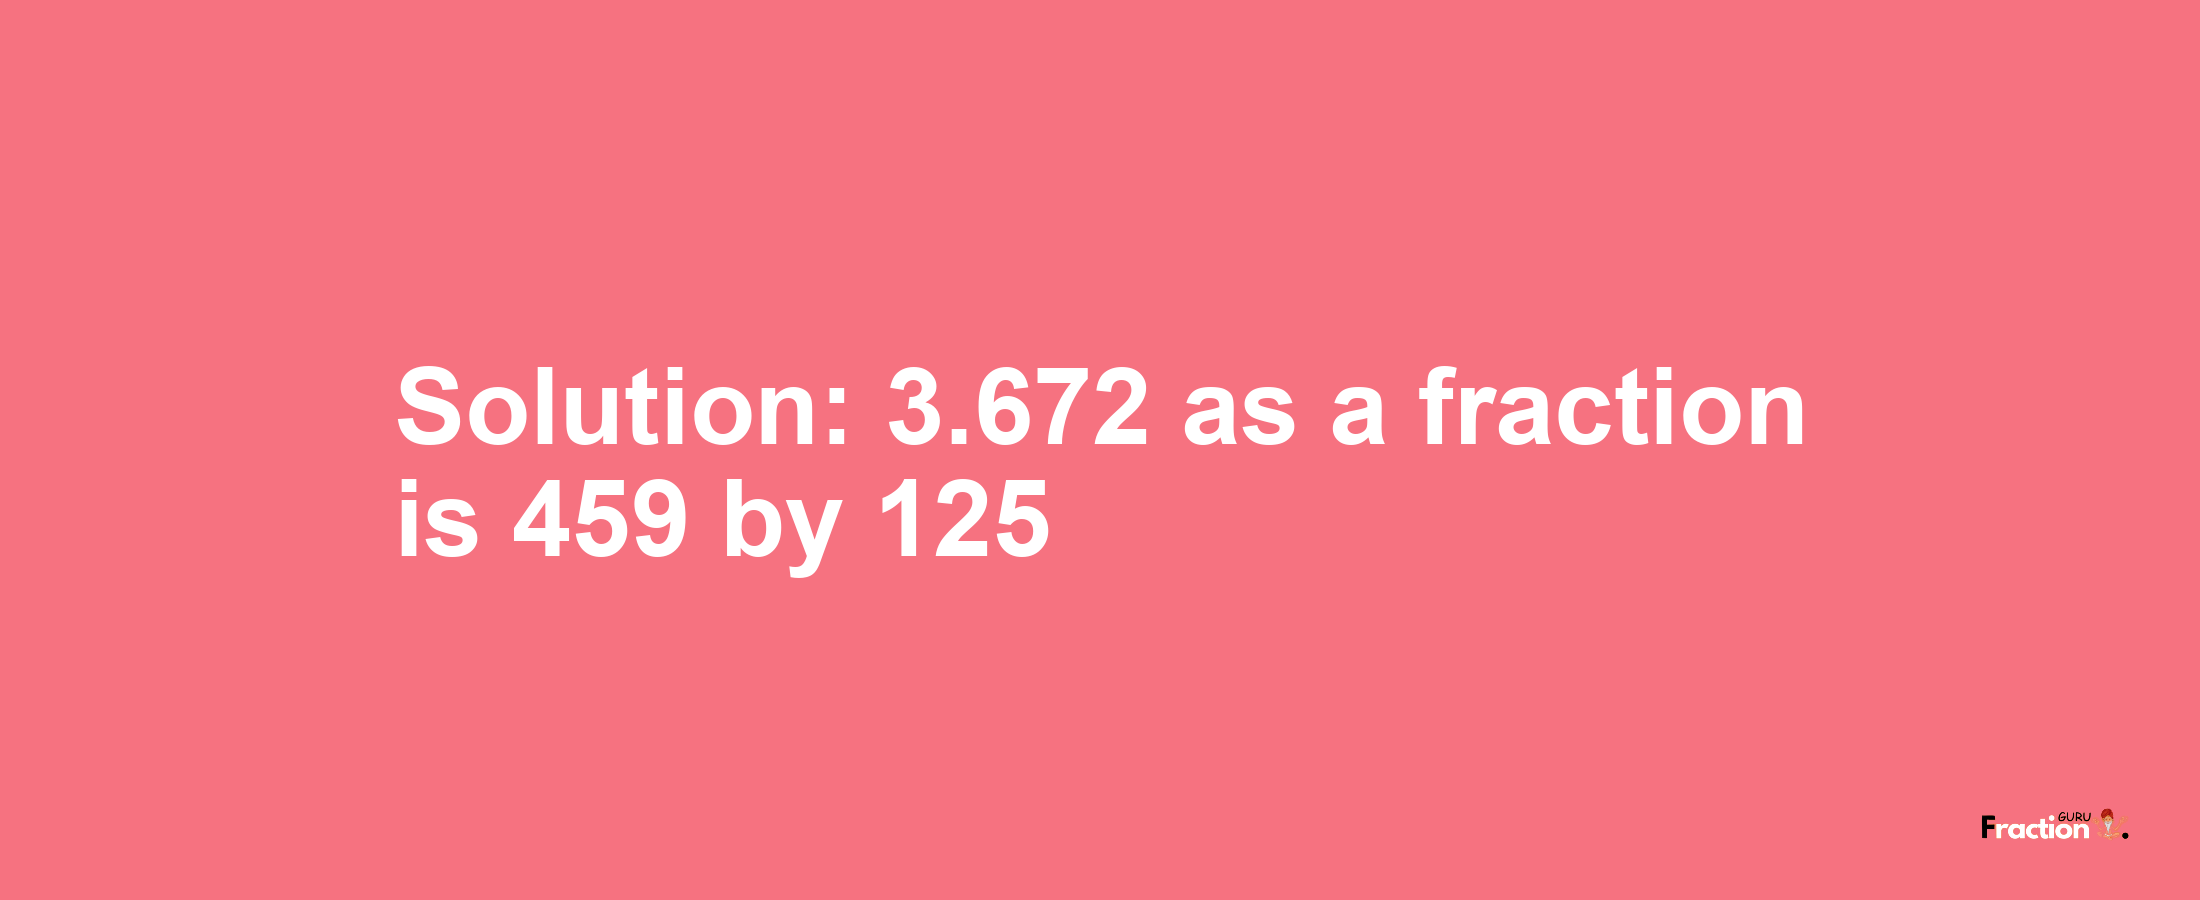 Solution:3.672 as a fraction is 459/125